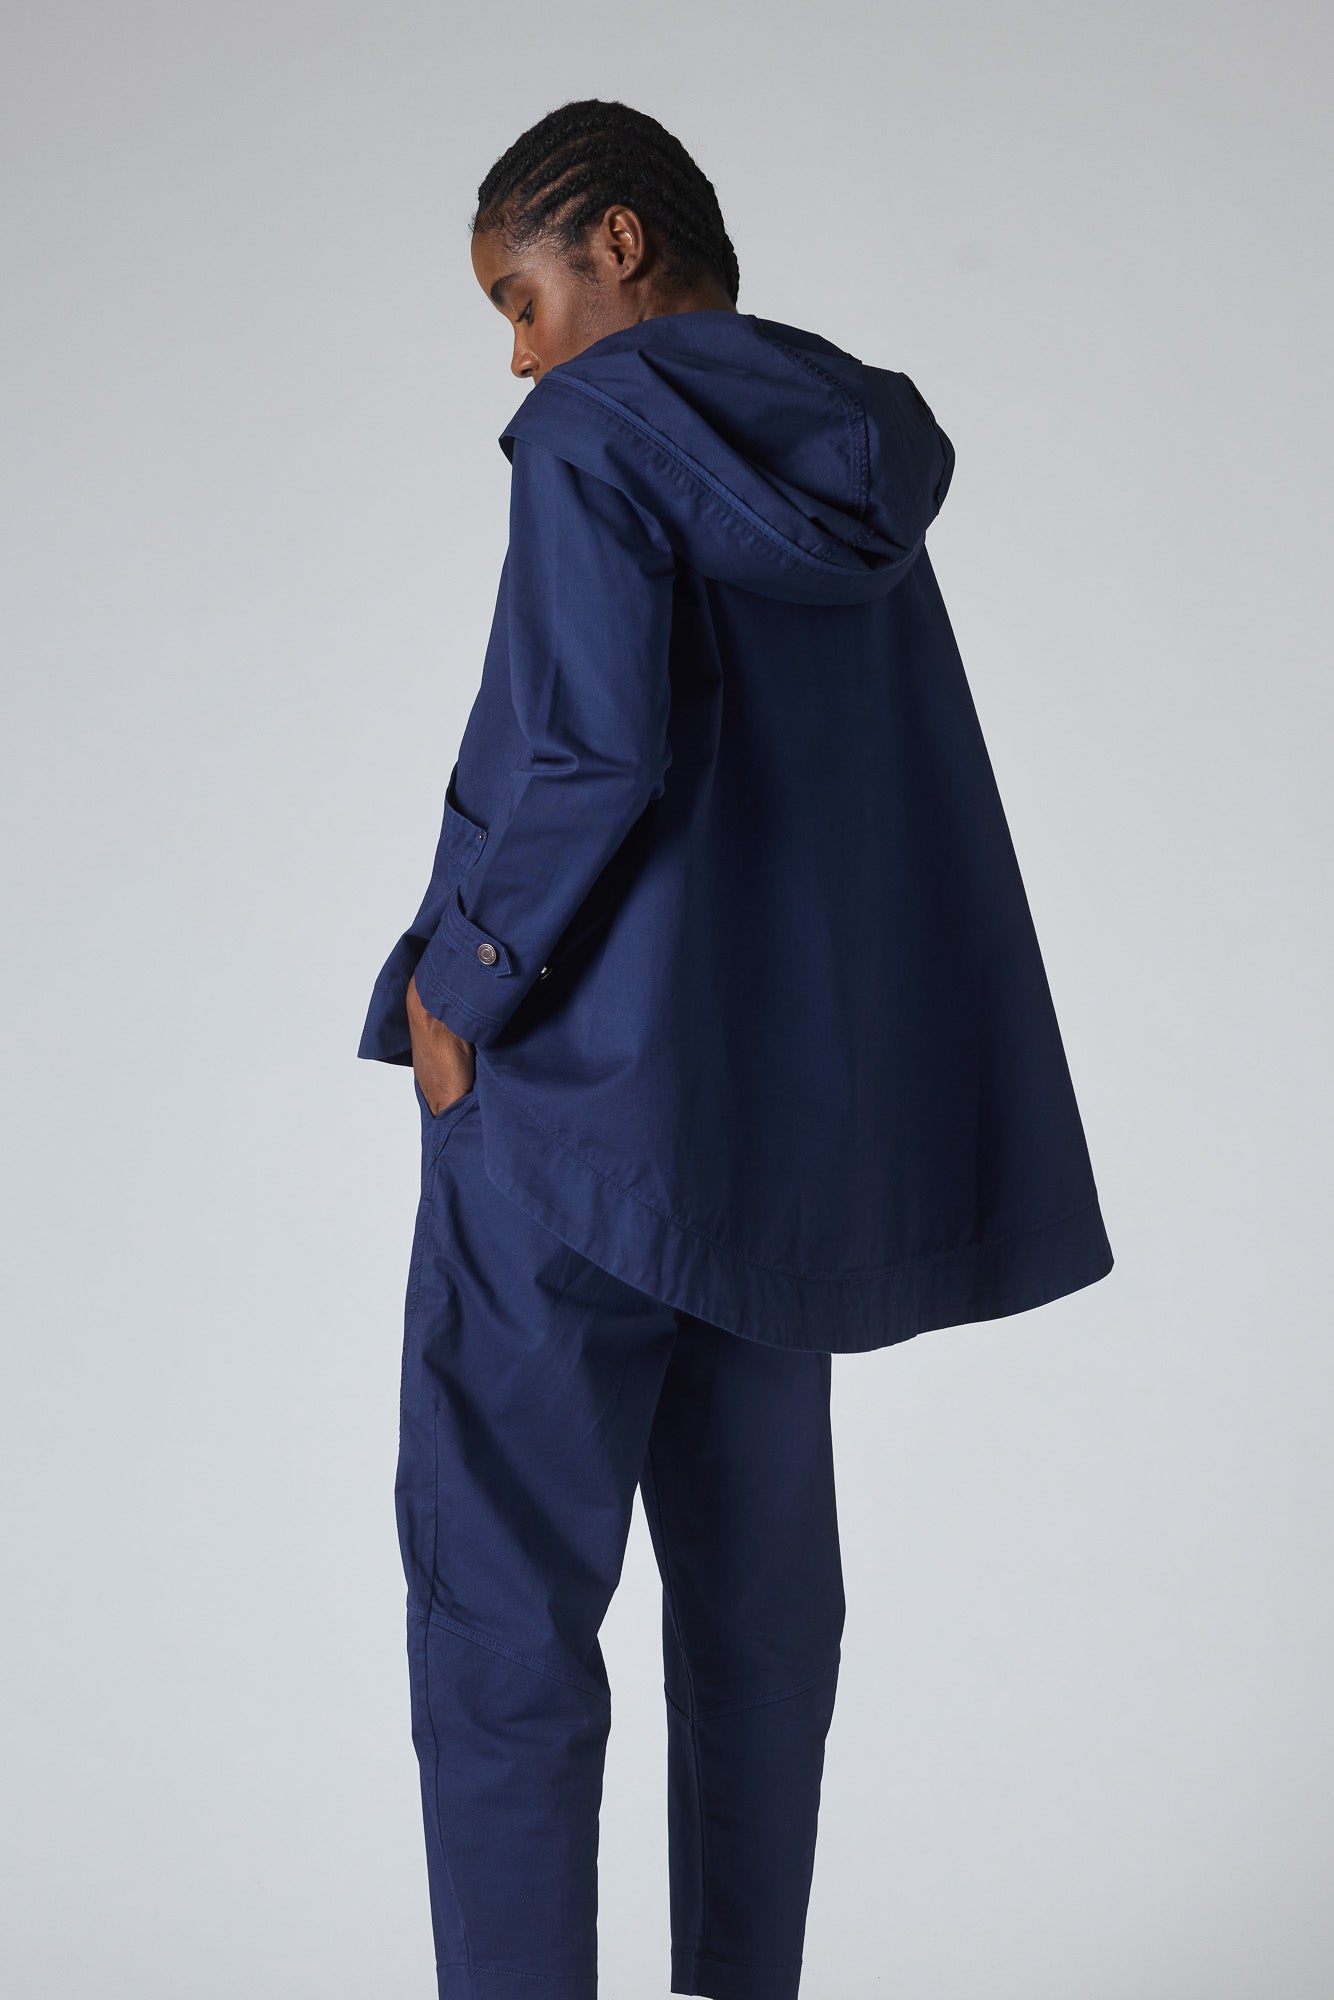 At Ease Twill Swing Jacket